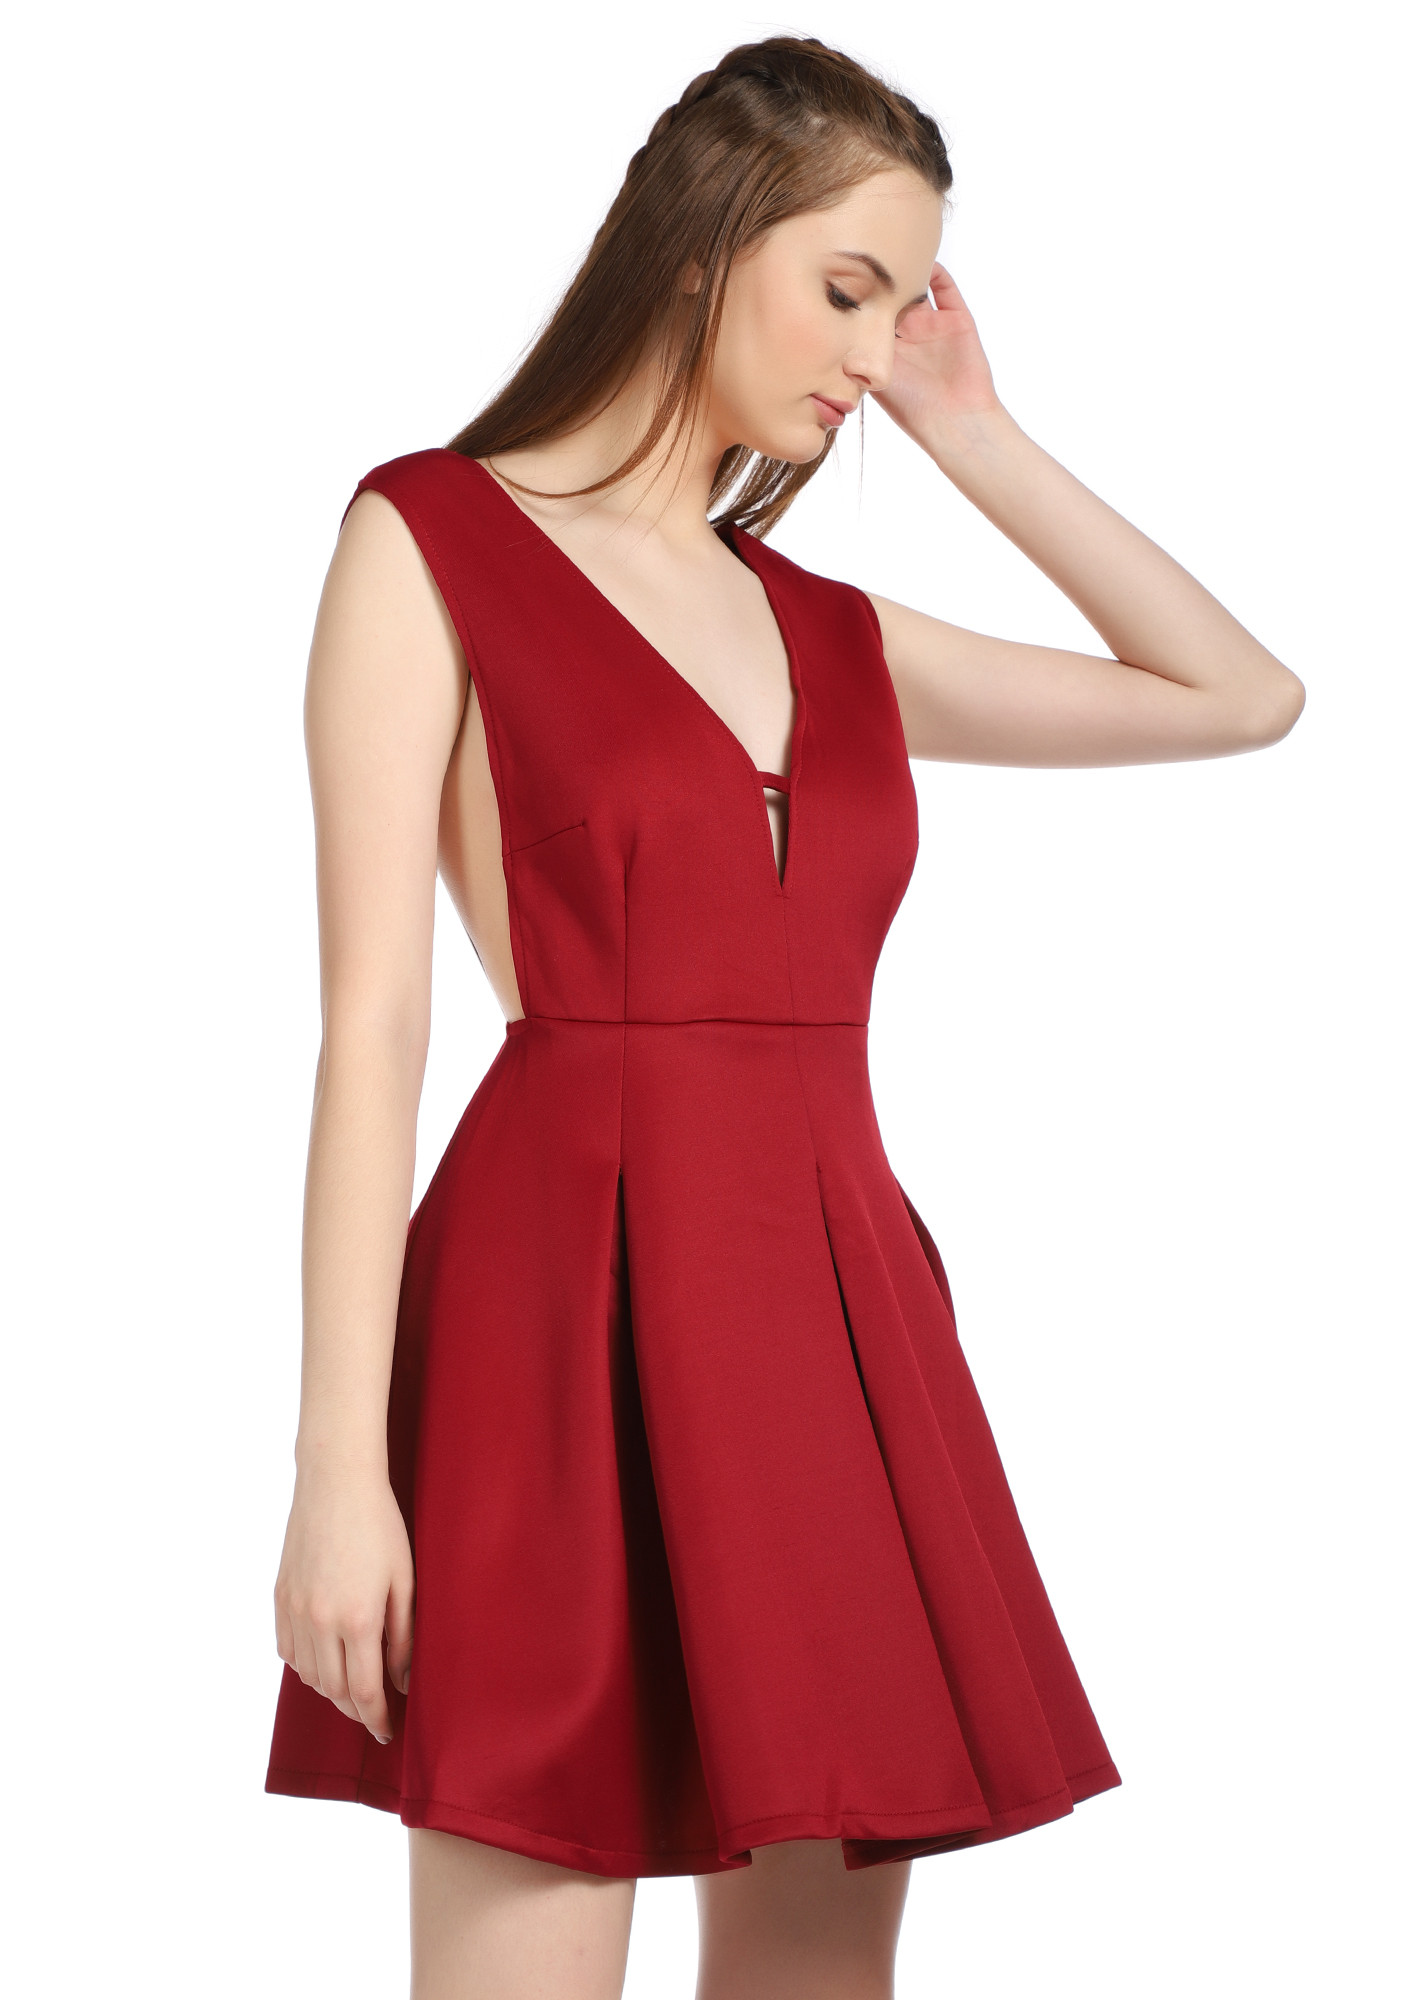 WILD THOUGHTS MAROON PINAFORE DRESS